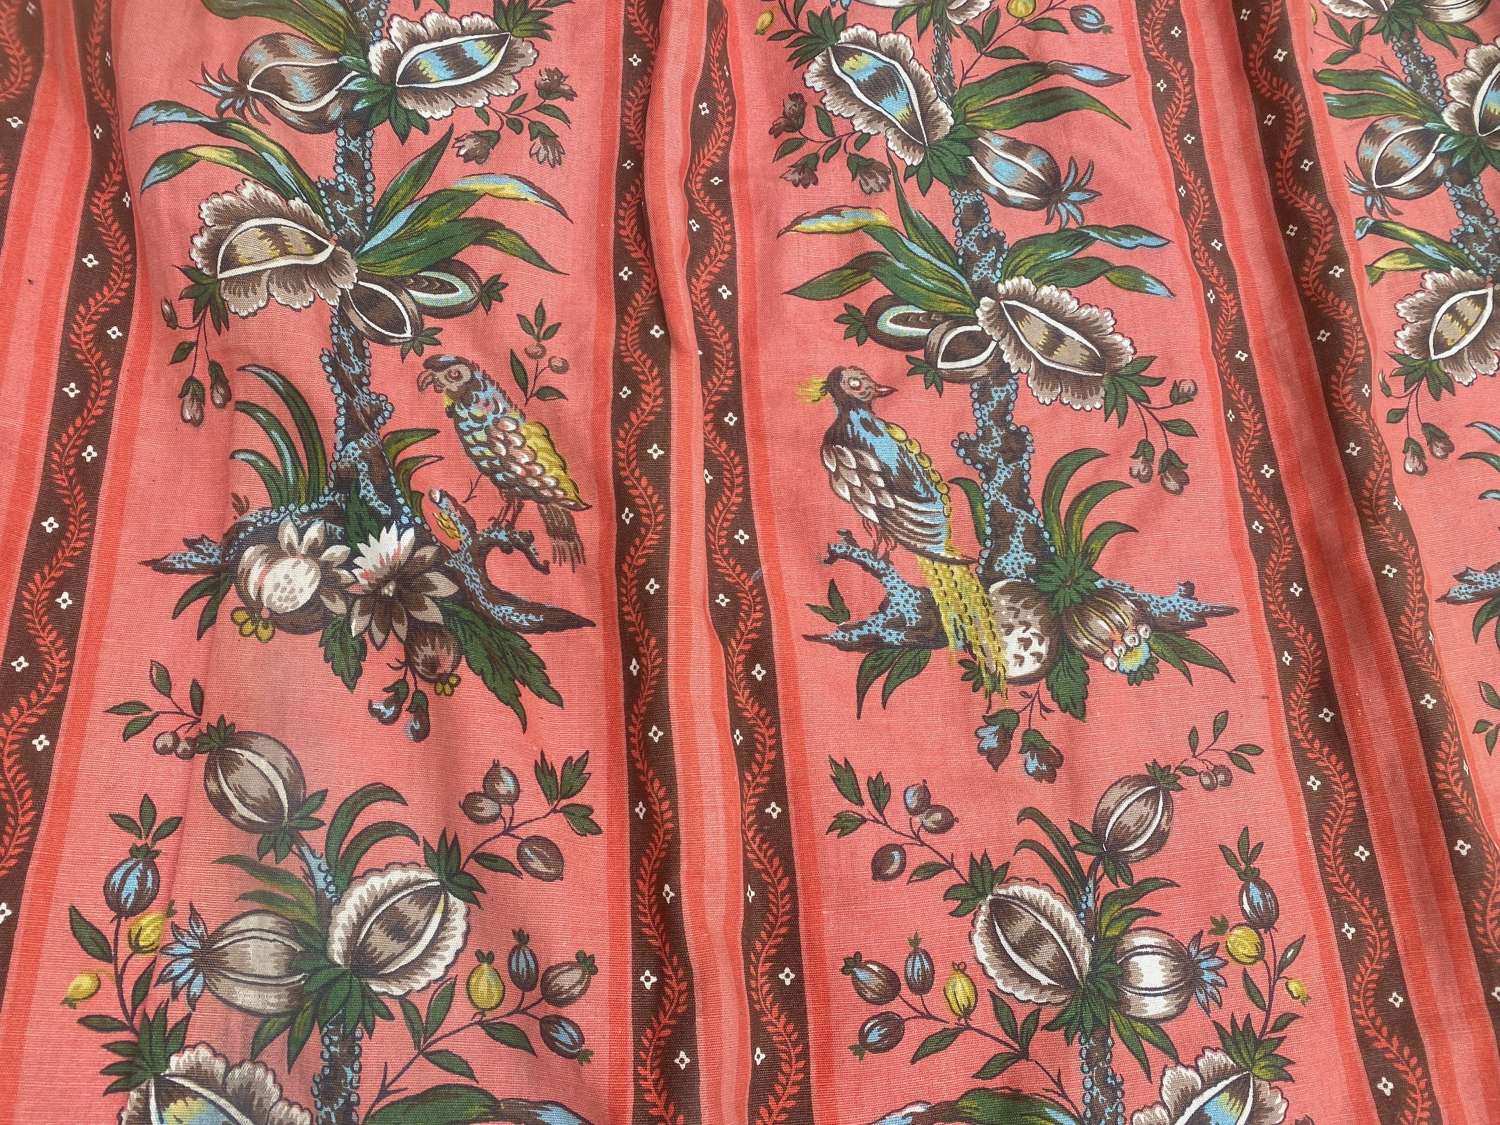 Beautiful pair of coral Edwardian curtains